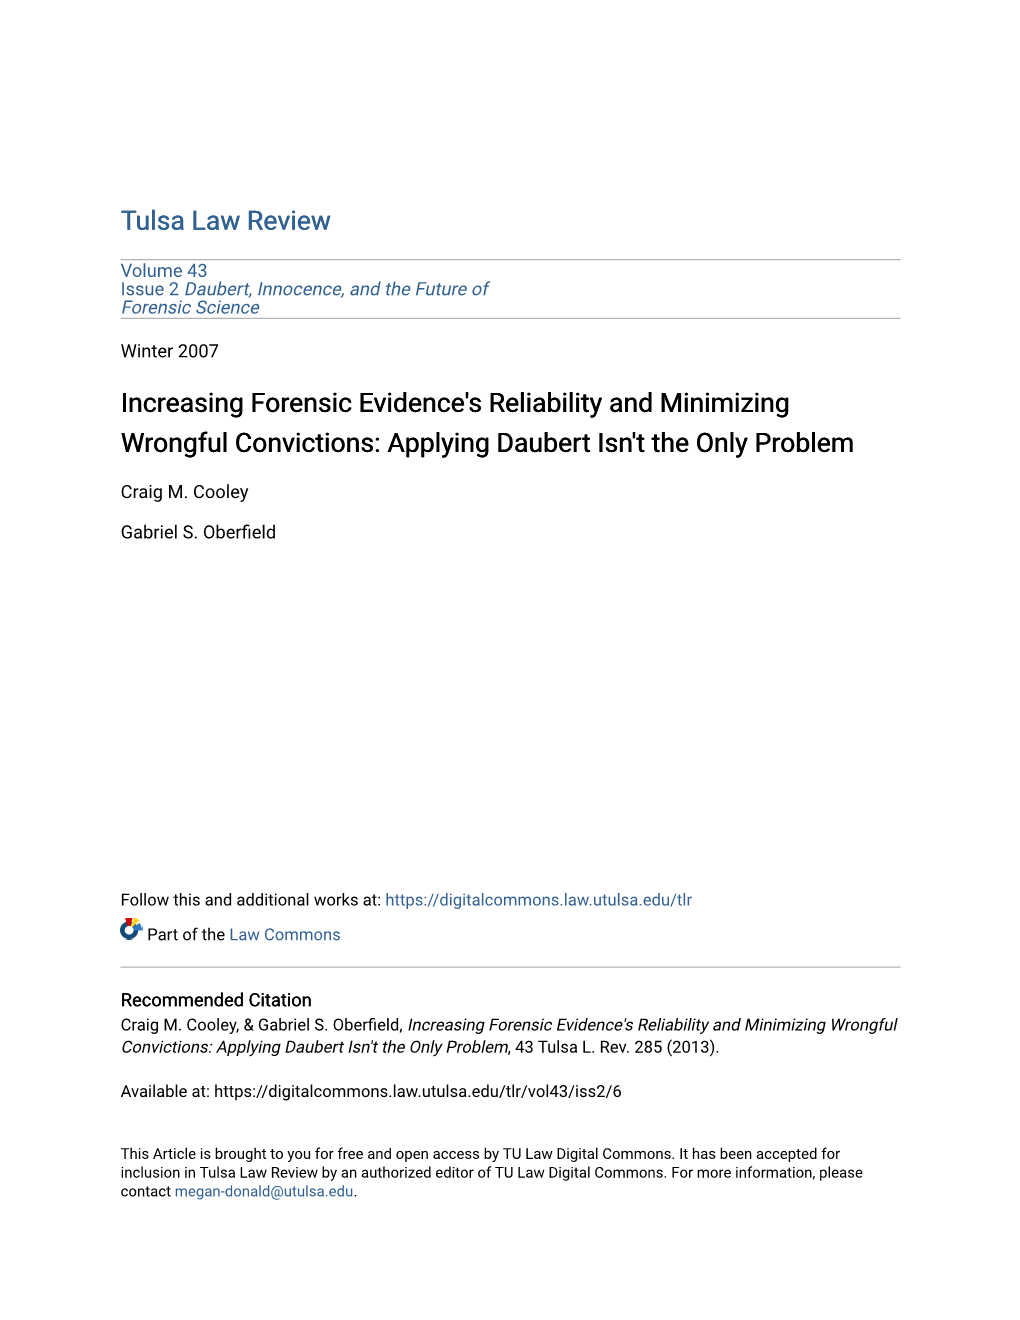 Increasing Forensic Evidence's Reliability and Minimizing Wrongful Convictions: Applying Daubert Isn't the Only Problem